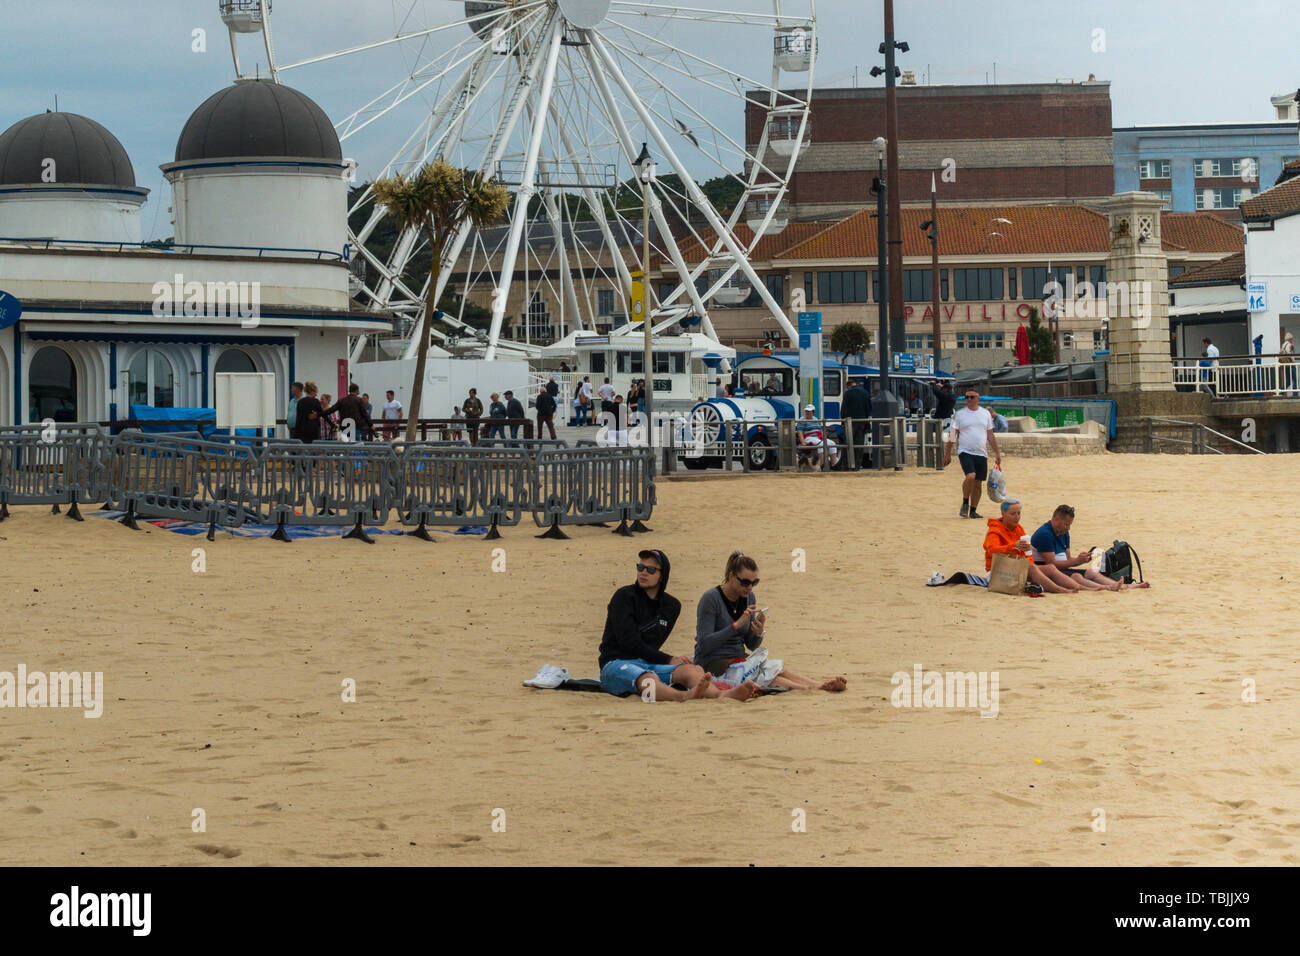 Bournemouth, Dorset, UK, 2nd June 2019. A cool start in the south of England meant that some visitors to the beach were well wrapped up in coats and hoodies. The forecast was for 29 degrees Celsius but has only reached 20 degrees mid morning with a cool wind. Credit: Mick Flynn/Alamy Live News Stock Photo